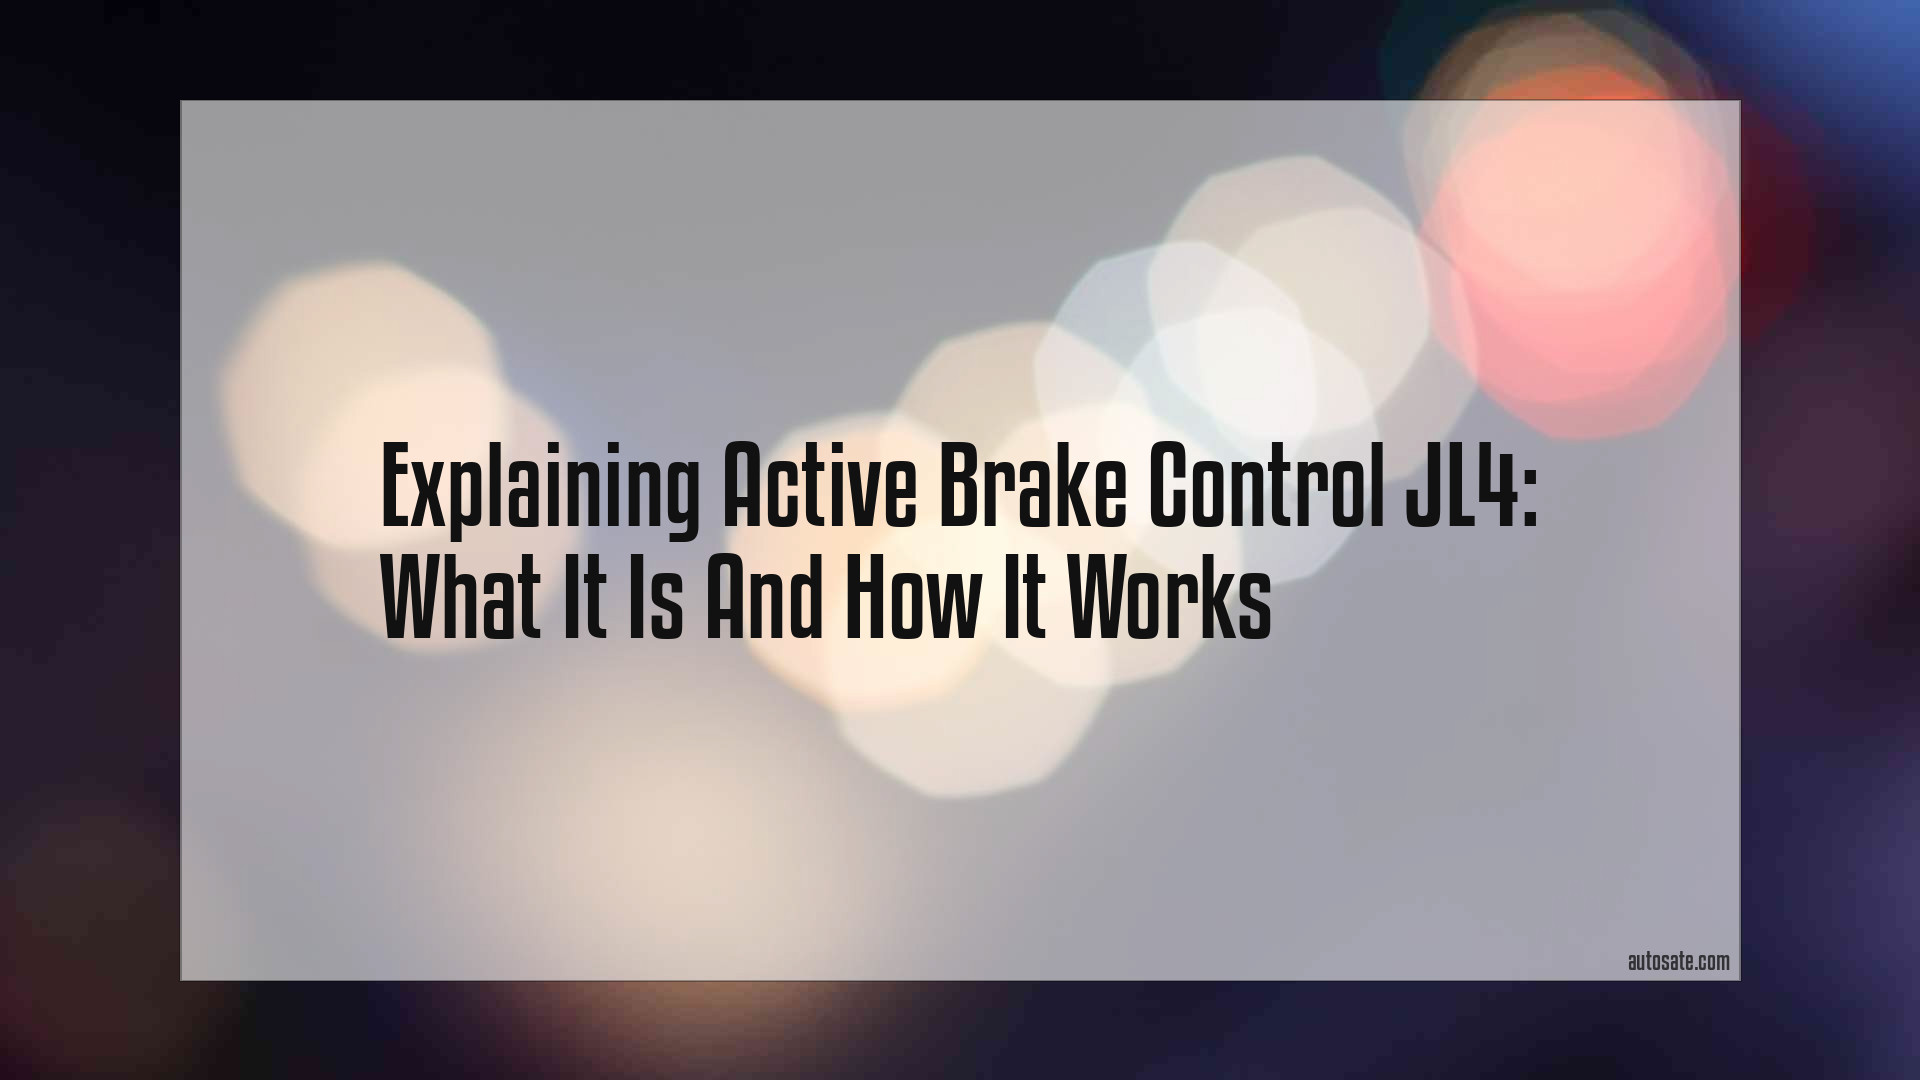 Explaining Active Brake Control Jl4: What It Is And How It Works